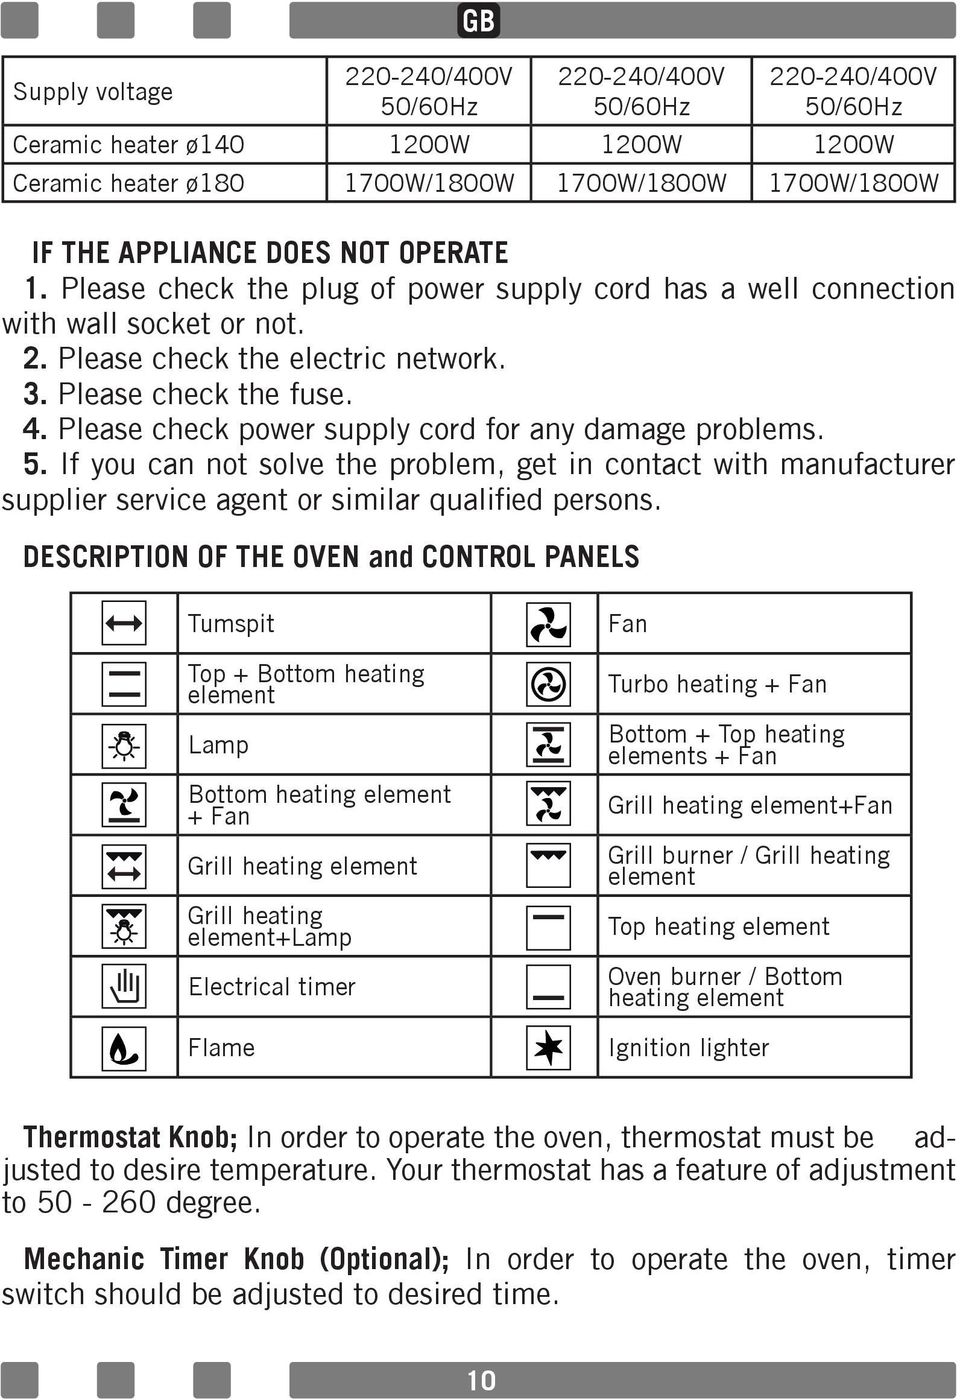 Please check power supply cord for any damage problems. 5. If you can not solve the problem, get in contact with manufacturer supplier service agent or similar qualified persons.